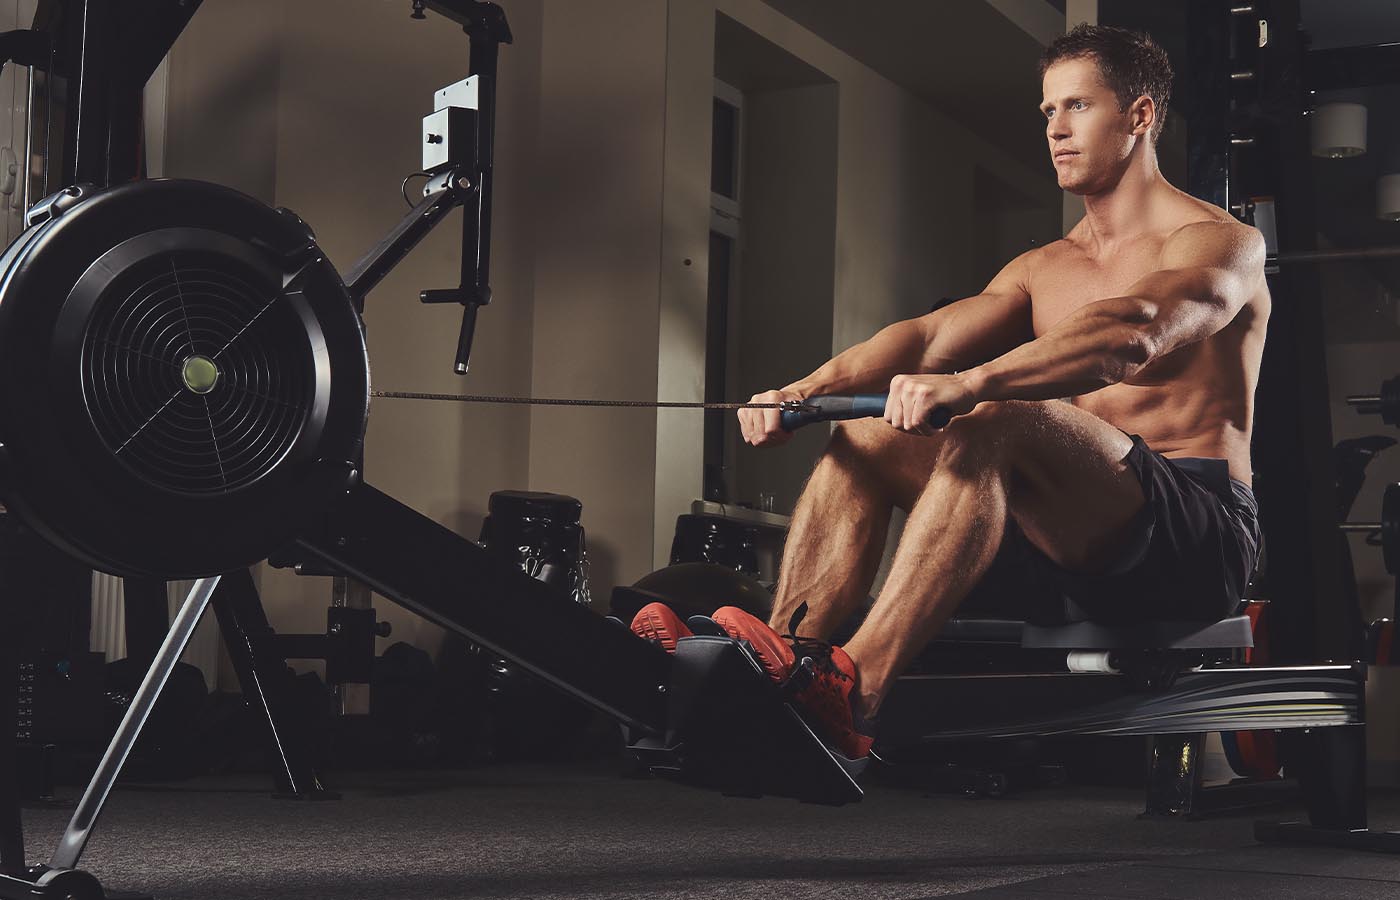 A male athlete demonstrating good form while using a rowing machine